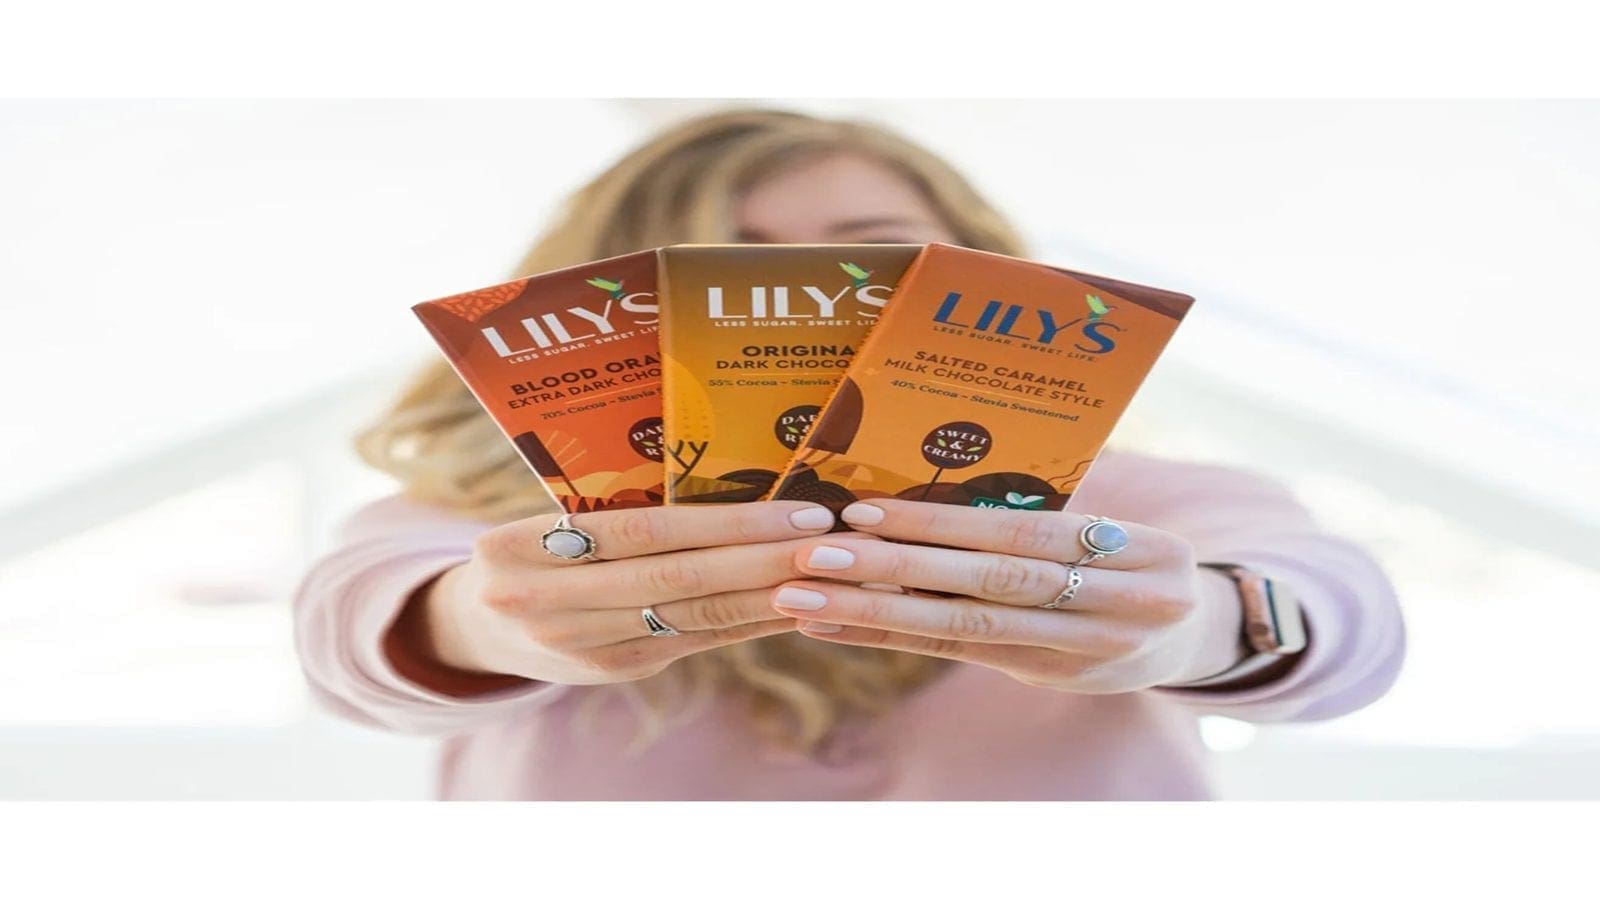 Hershey poised to expand offering with acquisition of better-for-you confectionery brand Lily’s